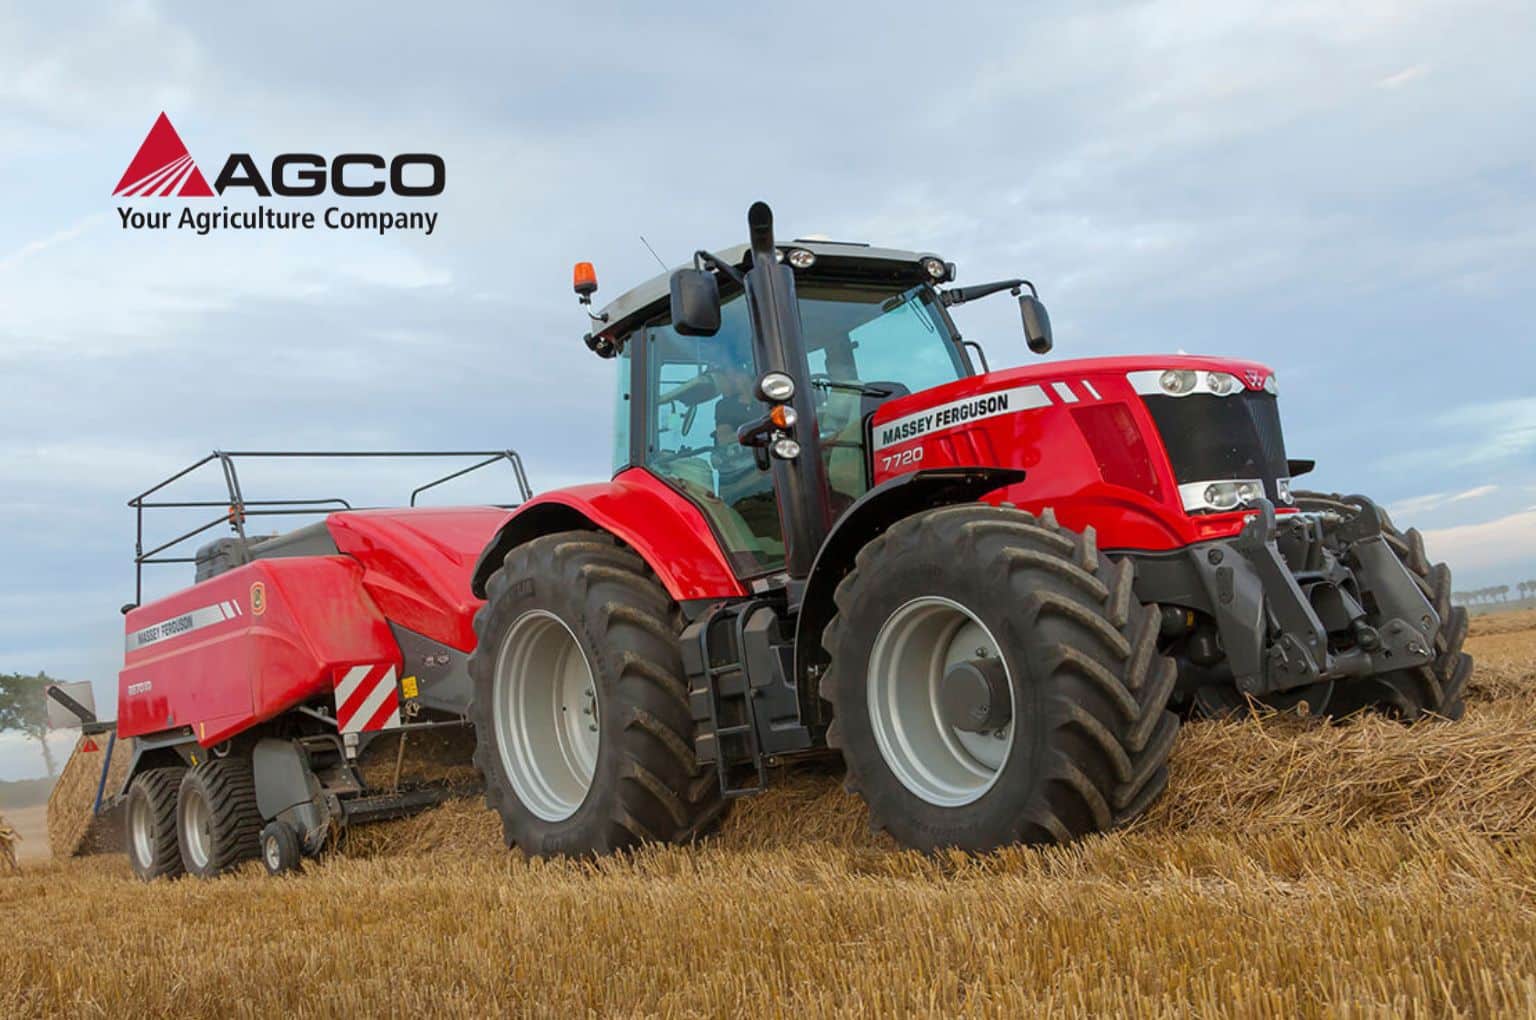 AGCO suppliers meeting